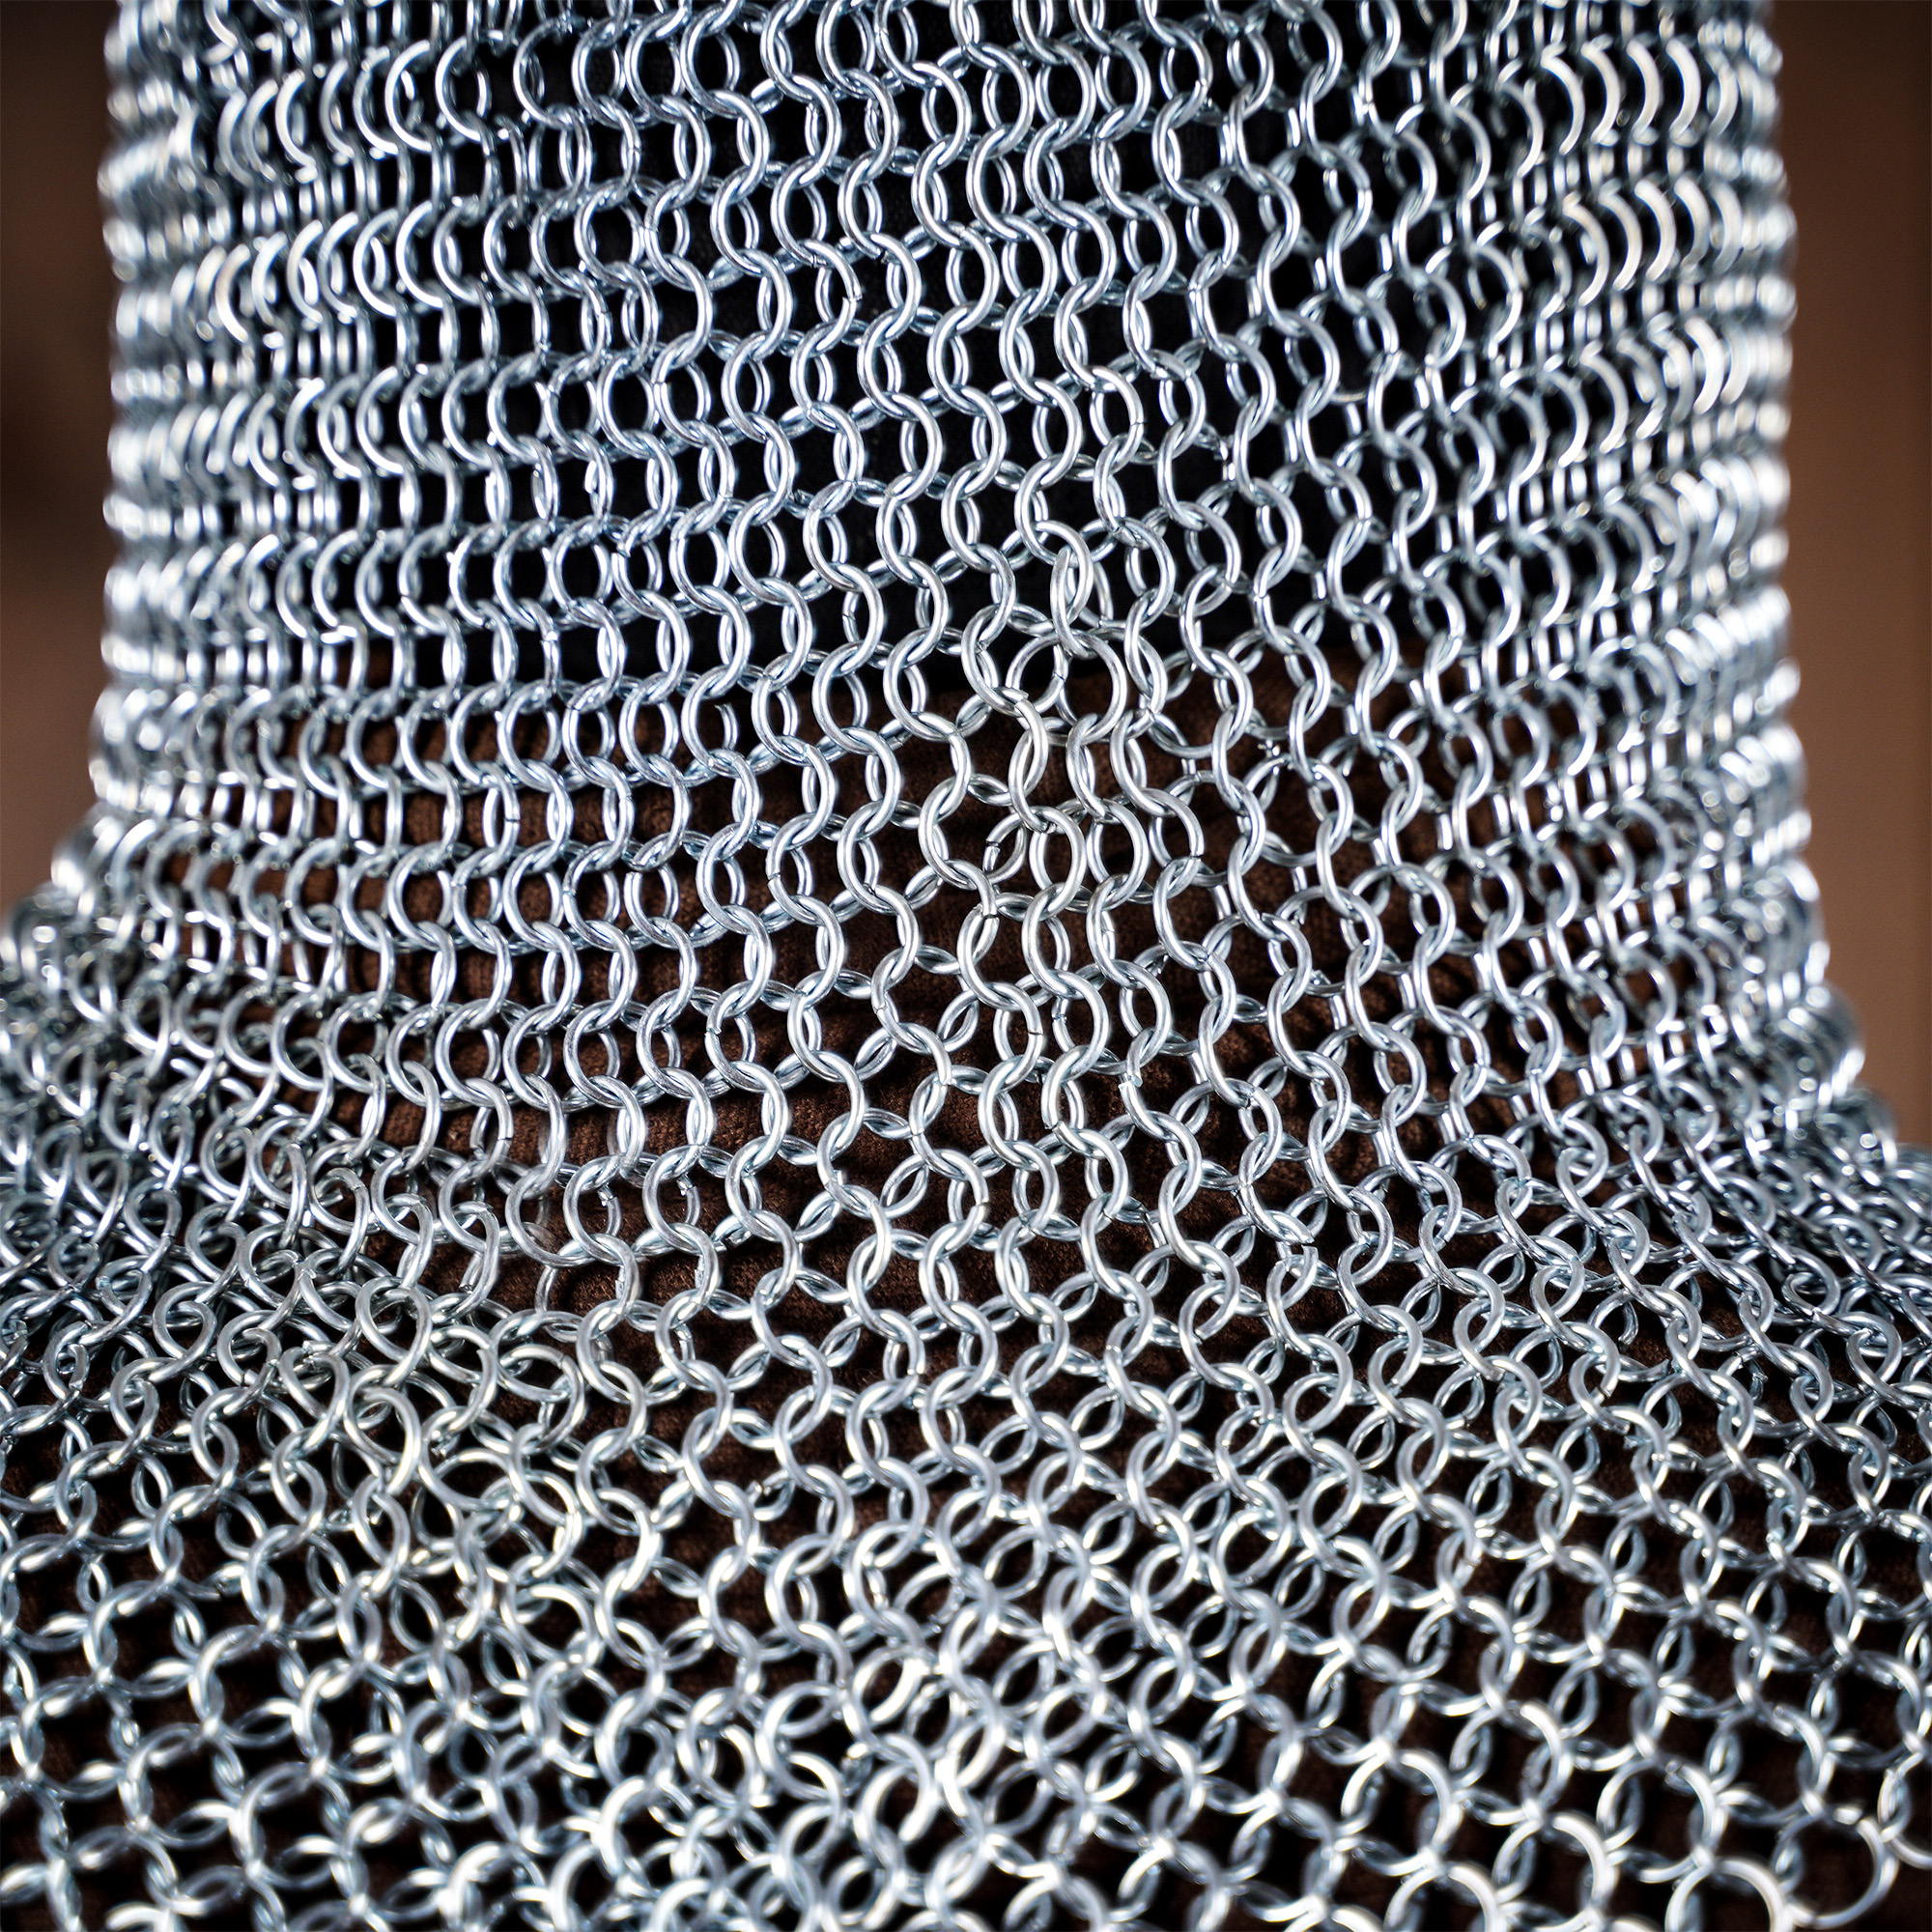 Childrens Aluminum and Rubber Chainmail Coif